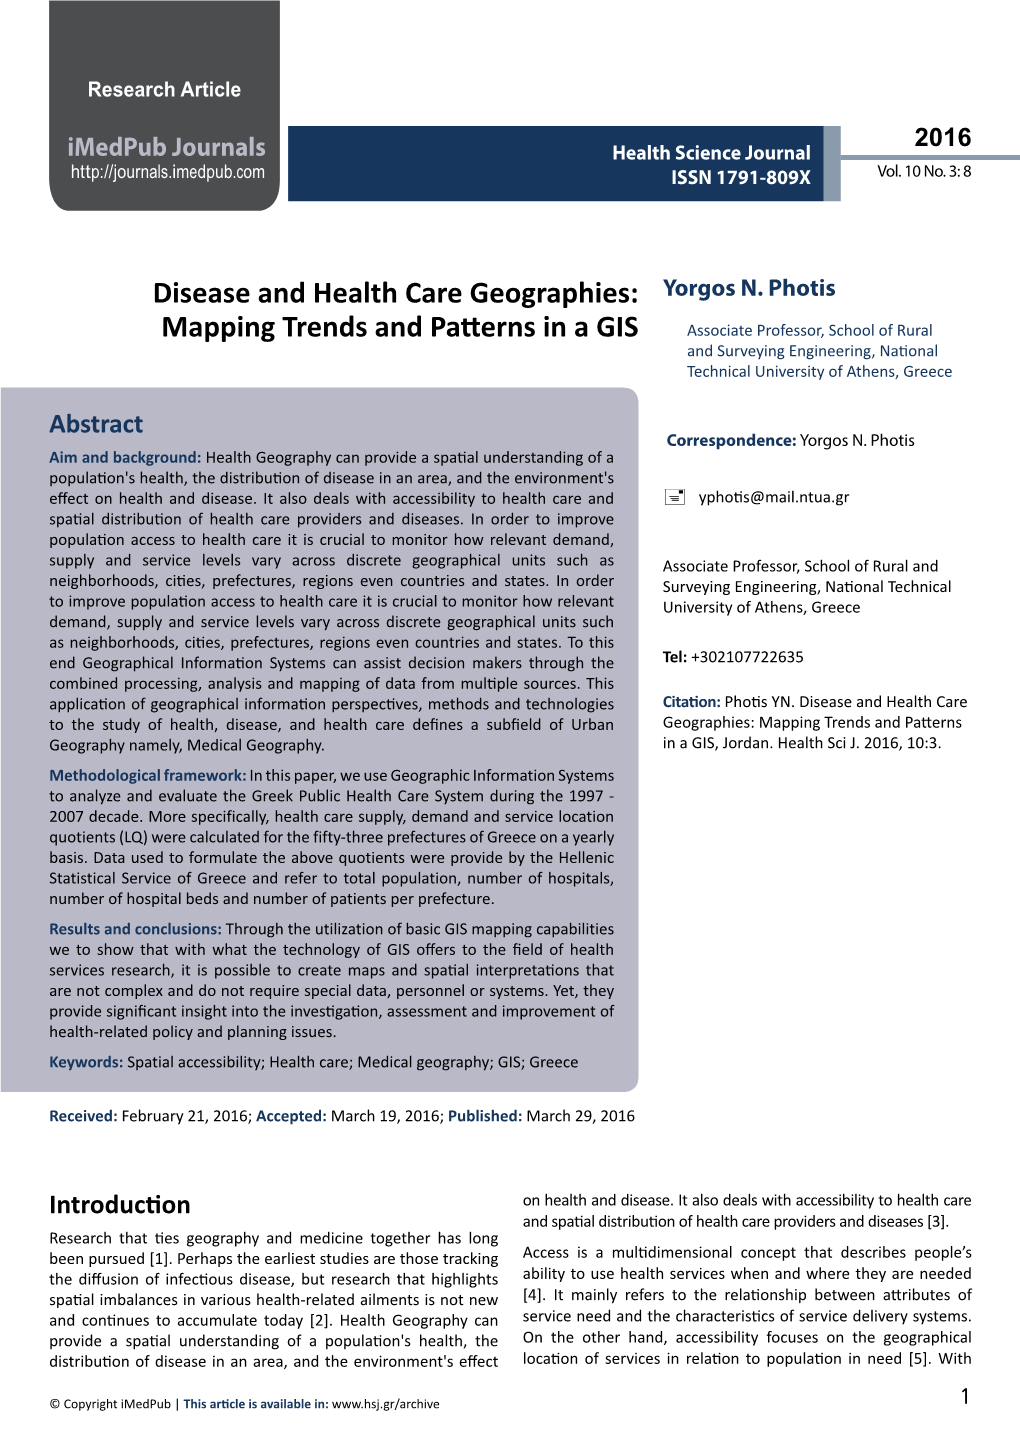 Disease and Health Care Geographies: Mapping Trends And